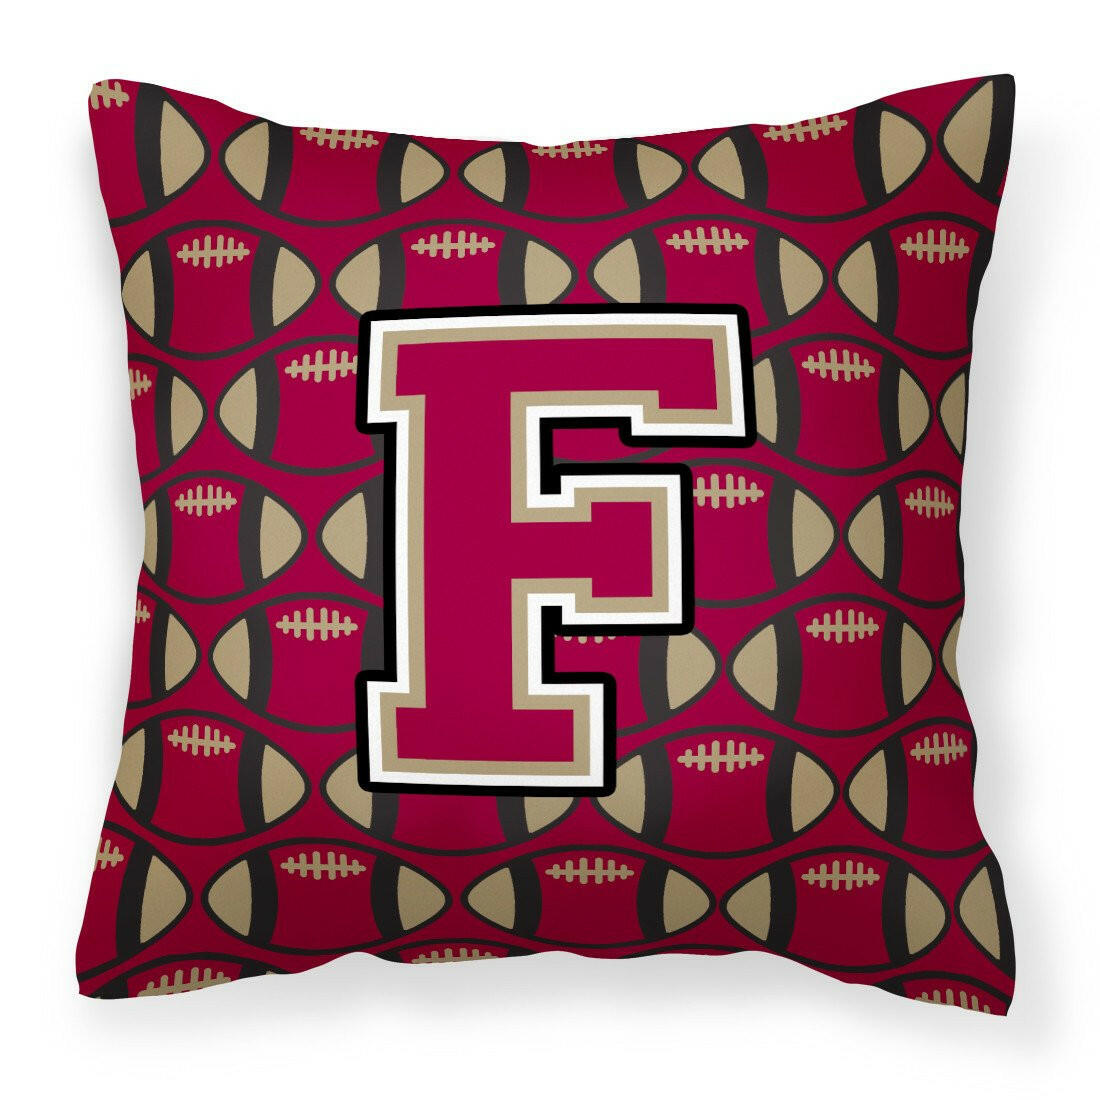 Letter F Football Garnet and Gold Fabric Decorative Pillow CJ1078-FPW1414 by Caroline's Treasures